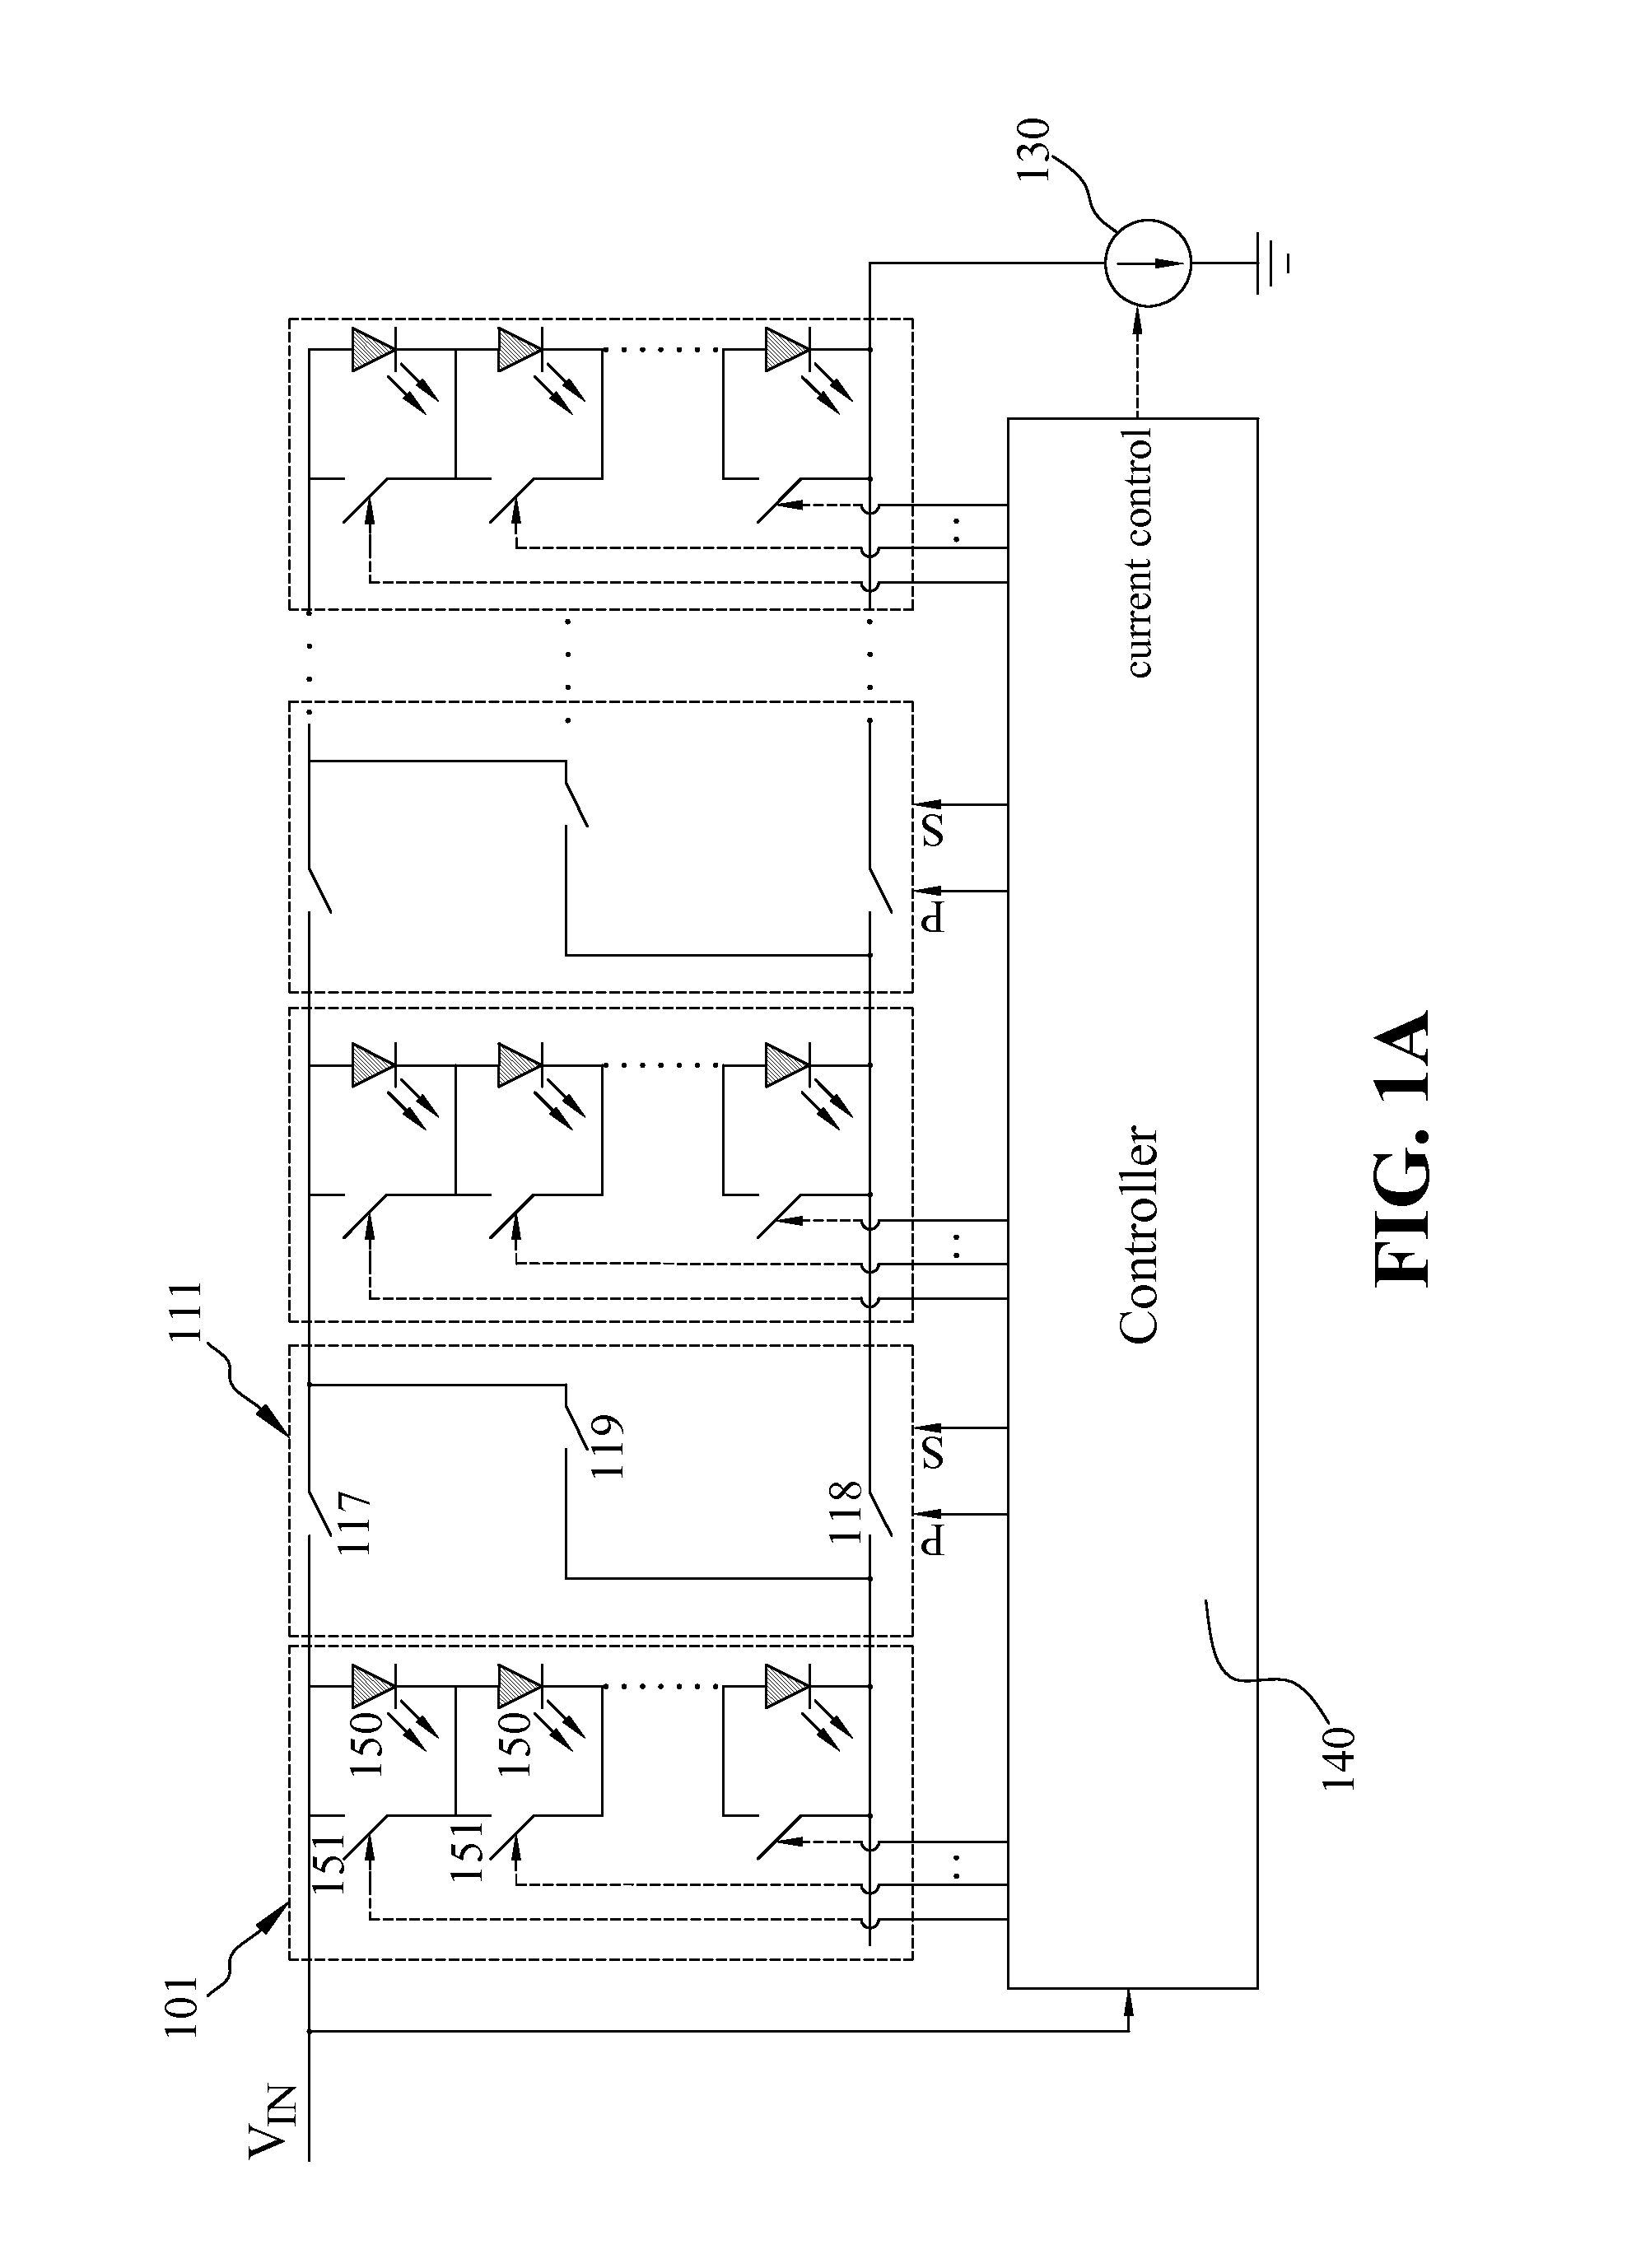 Apparatus having universal structure for driving a plurality of LED strings